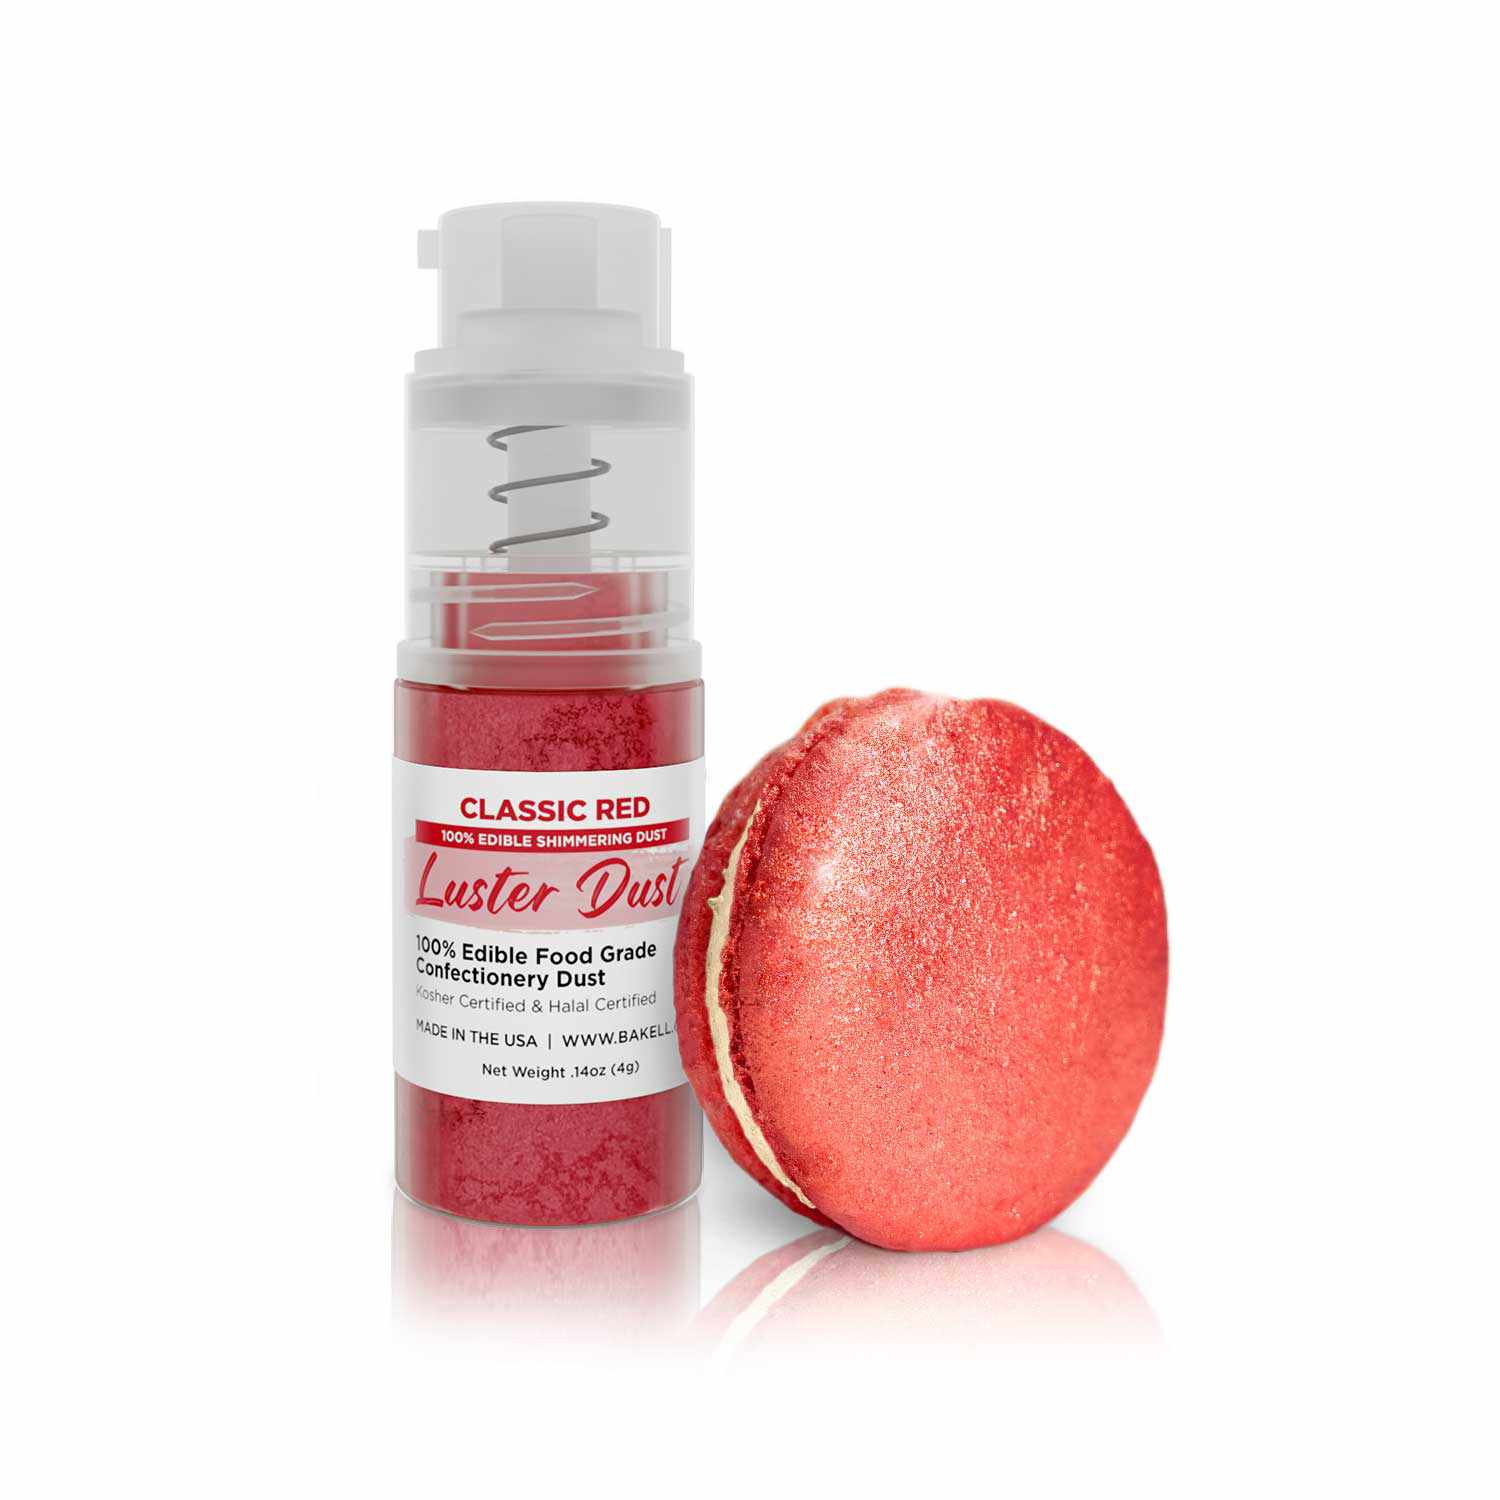 Classic Red Luster Dust Spray, Luster Dust Edible Glitter Spray Dust for  Cakes, Cookies, Desserts, Paint. FDA Compliant (4 Gram Pump)